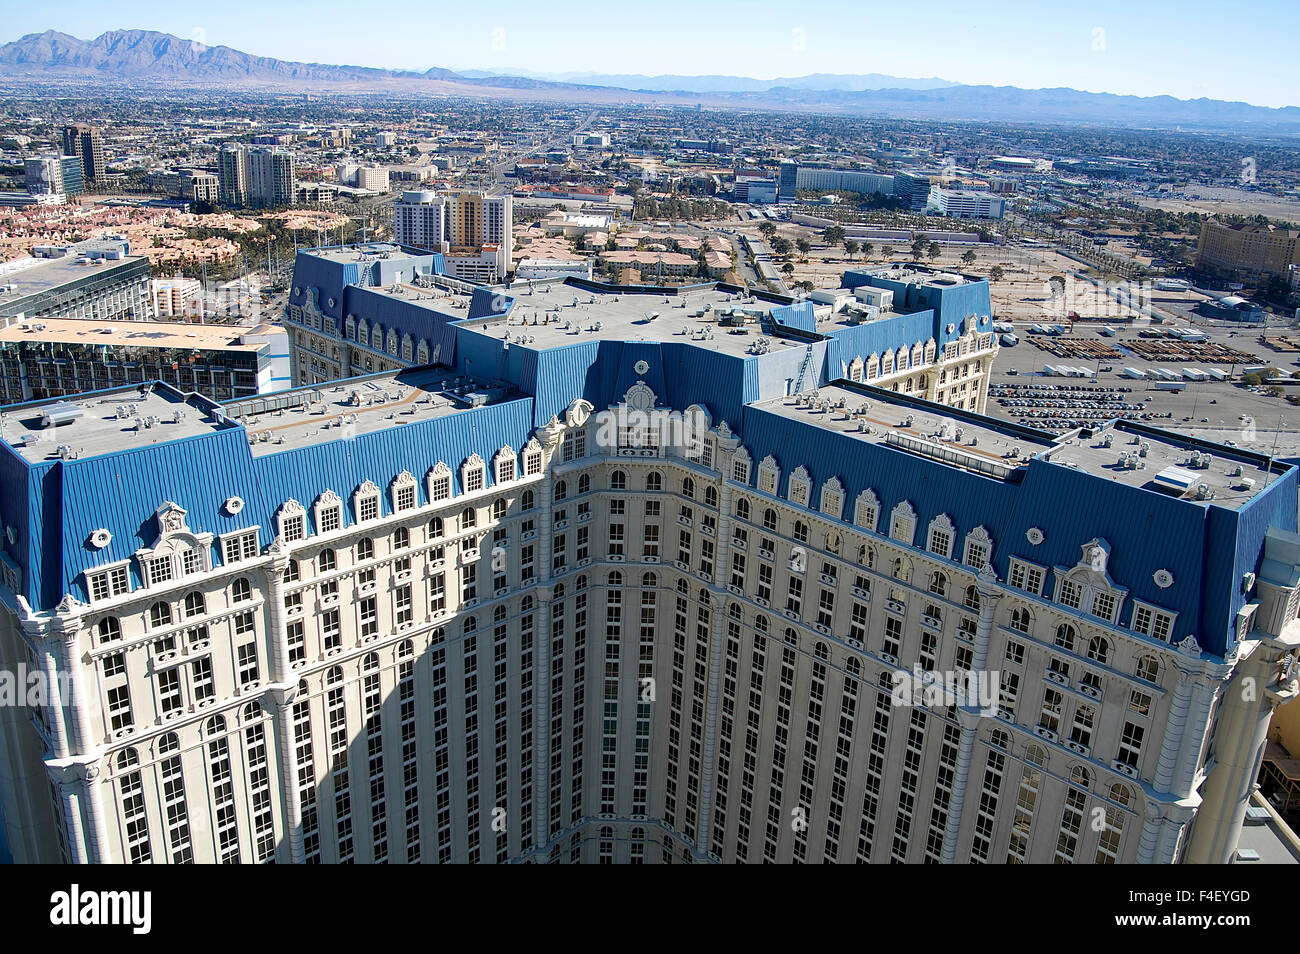 A view of Paris Las Vegas's hotel tower, from the top of the